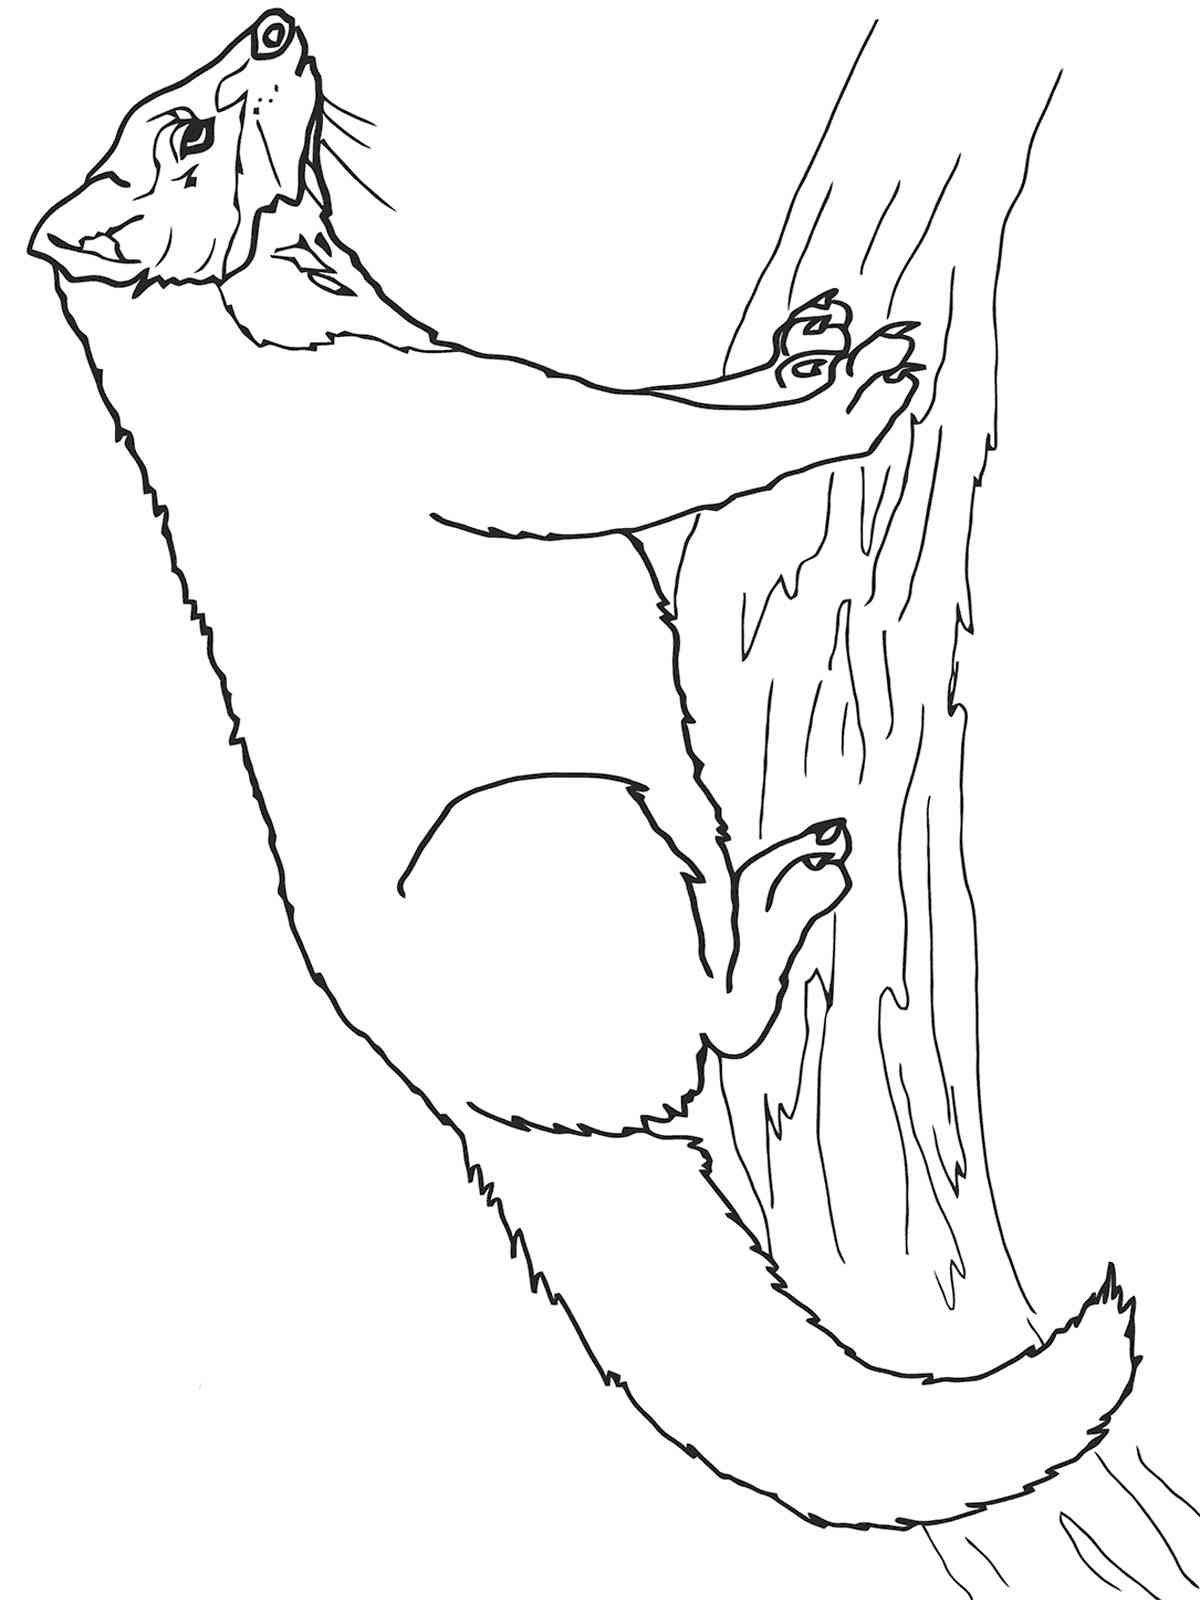 Marten on a Branch coloring page